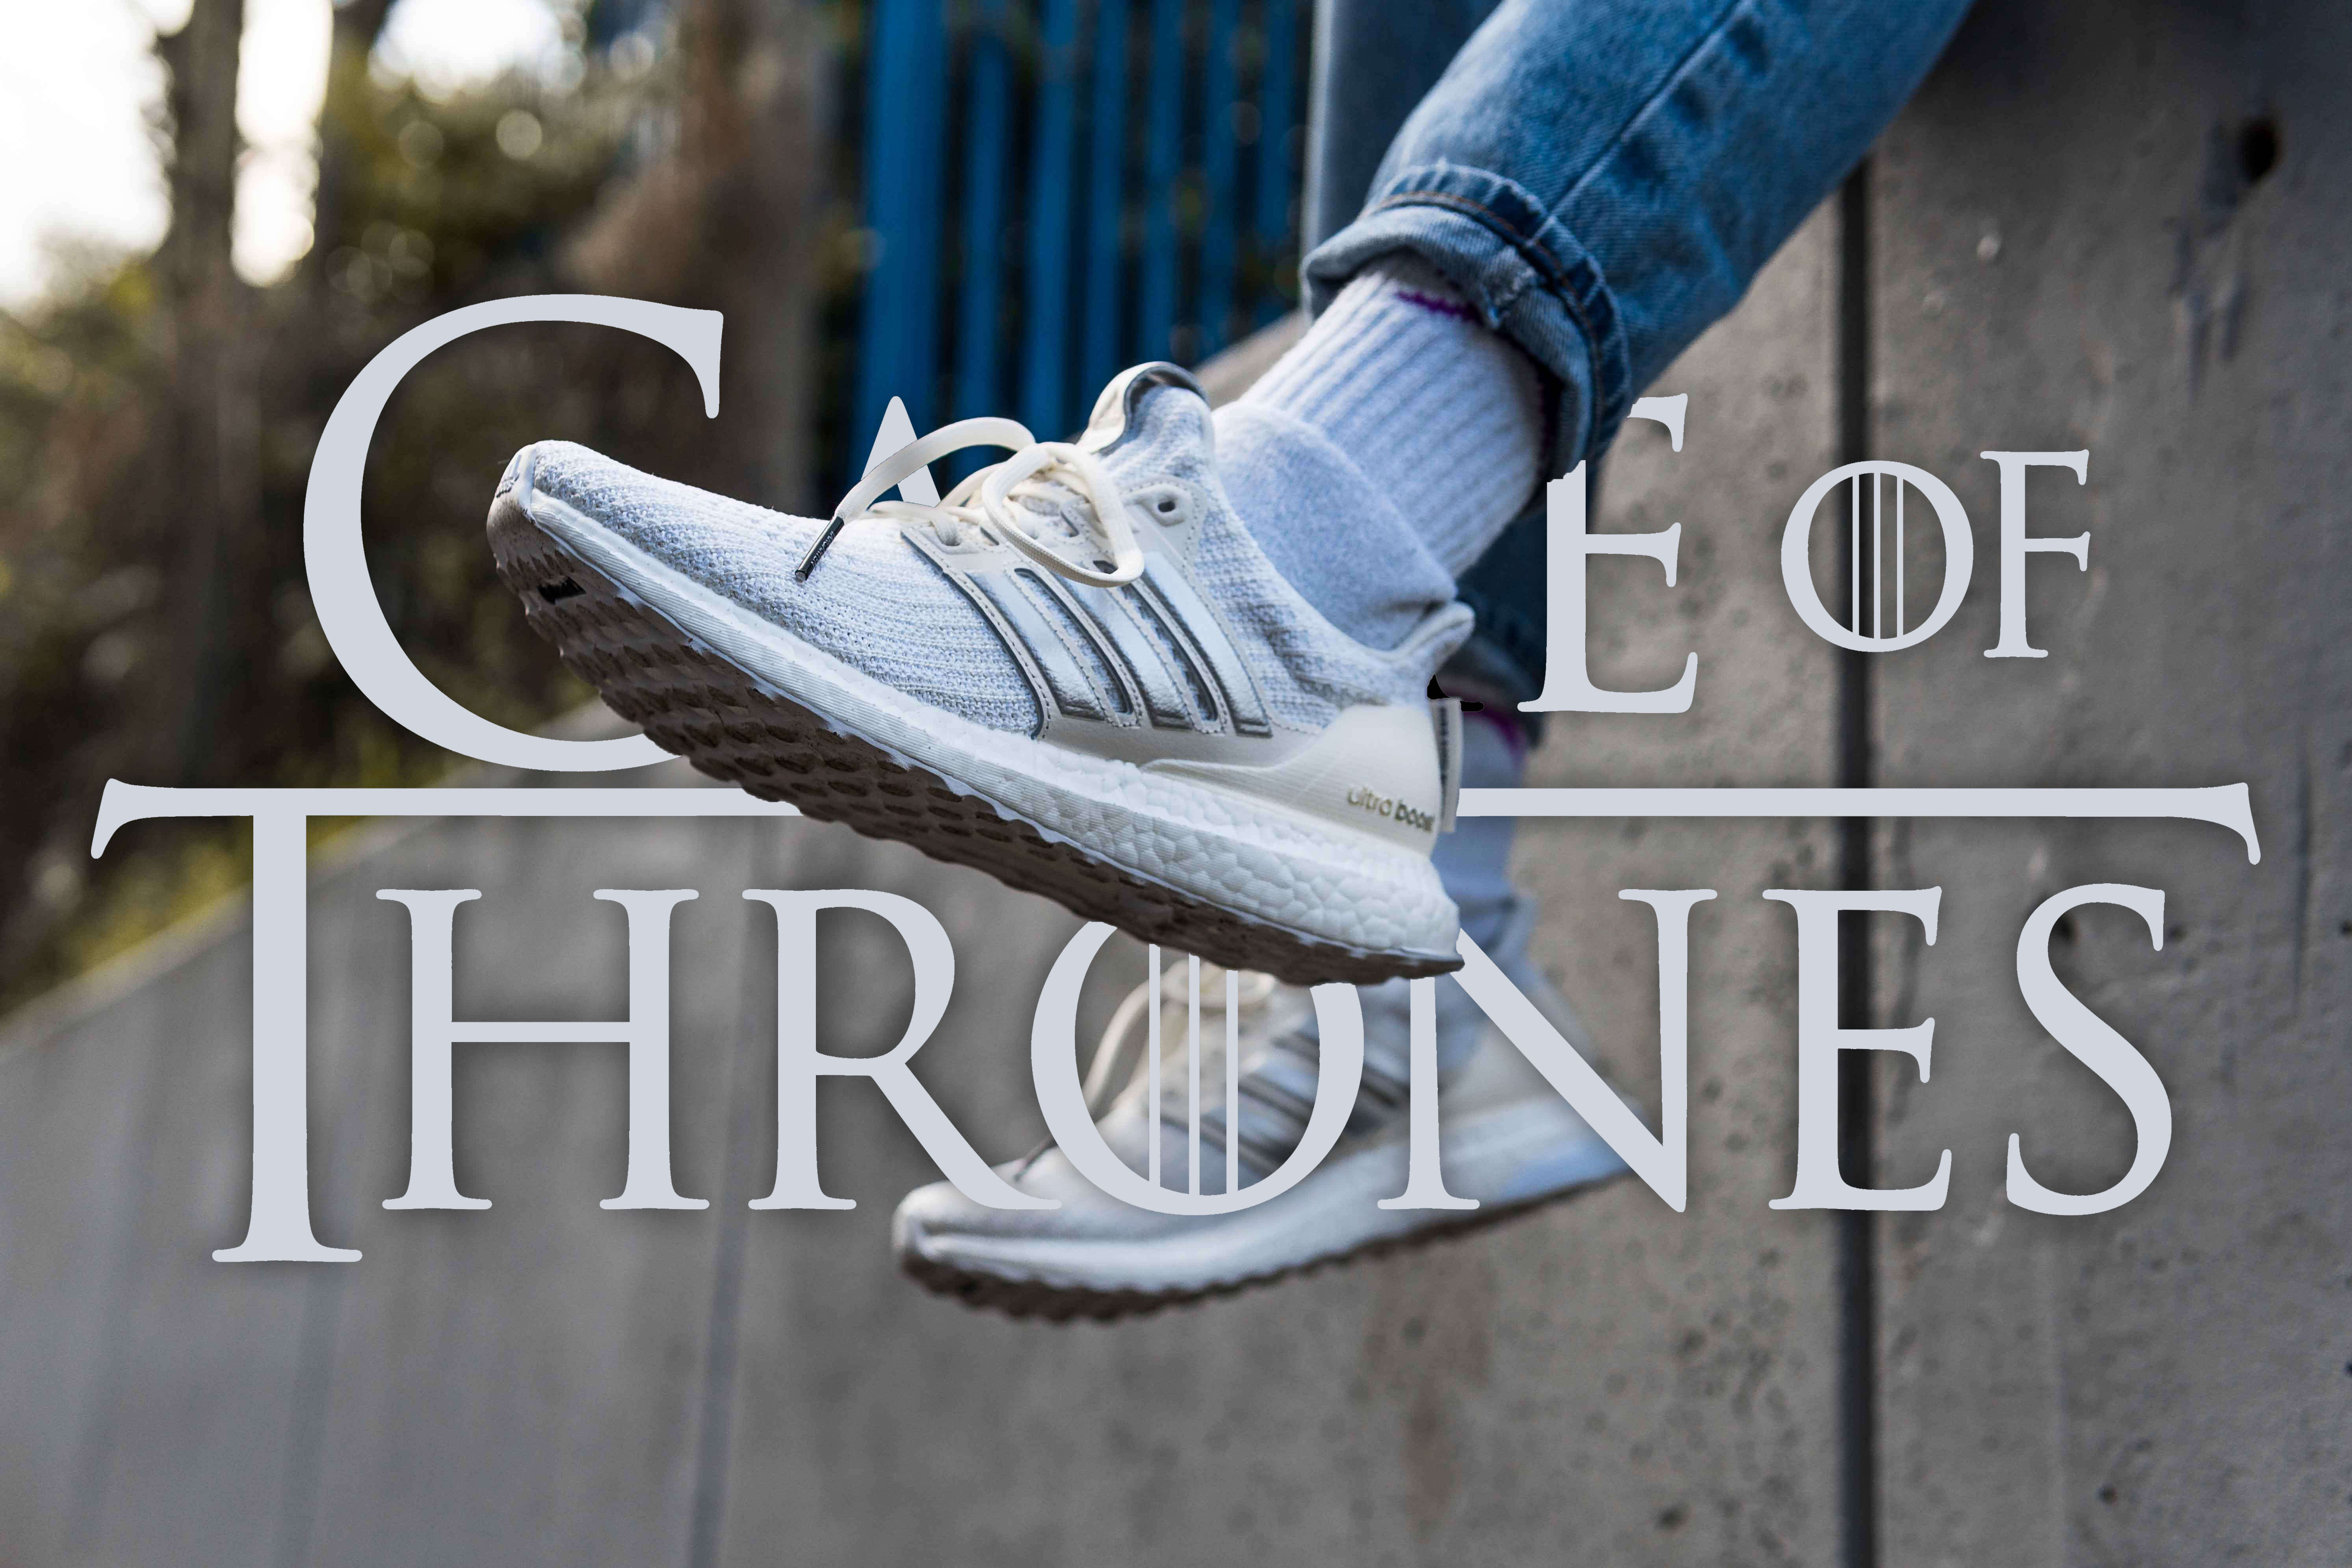 game of thrones ultra boost on feet